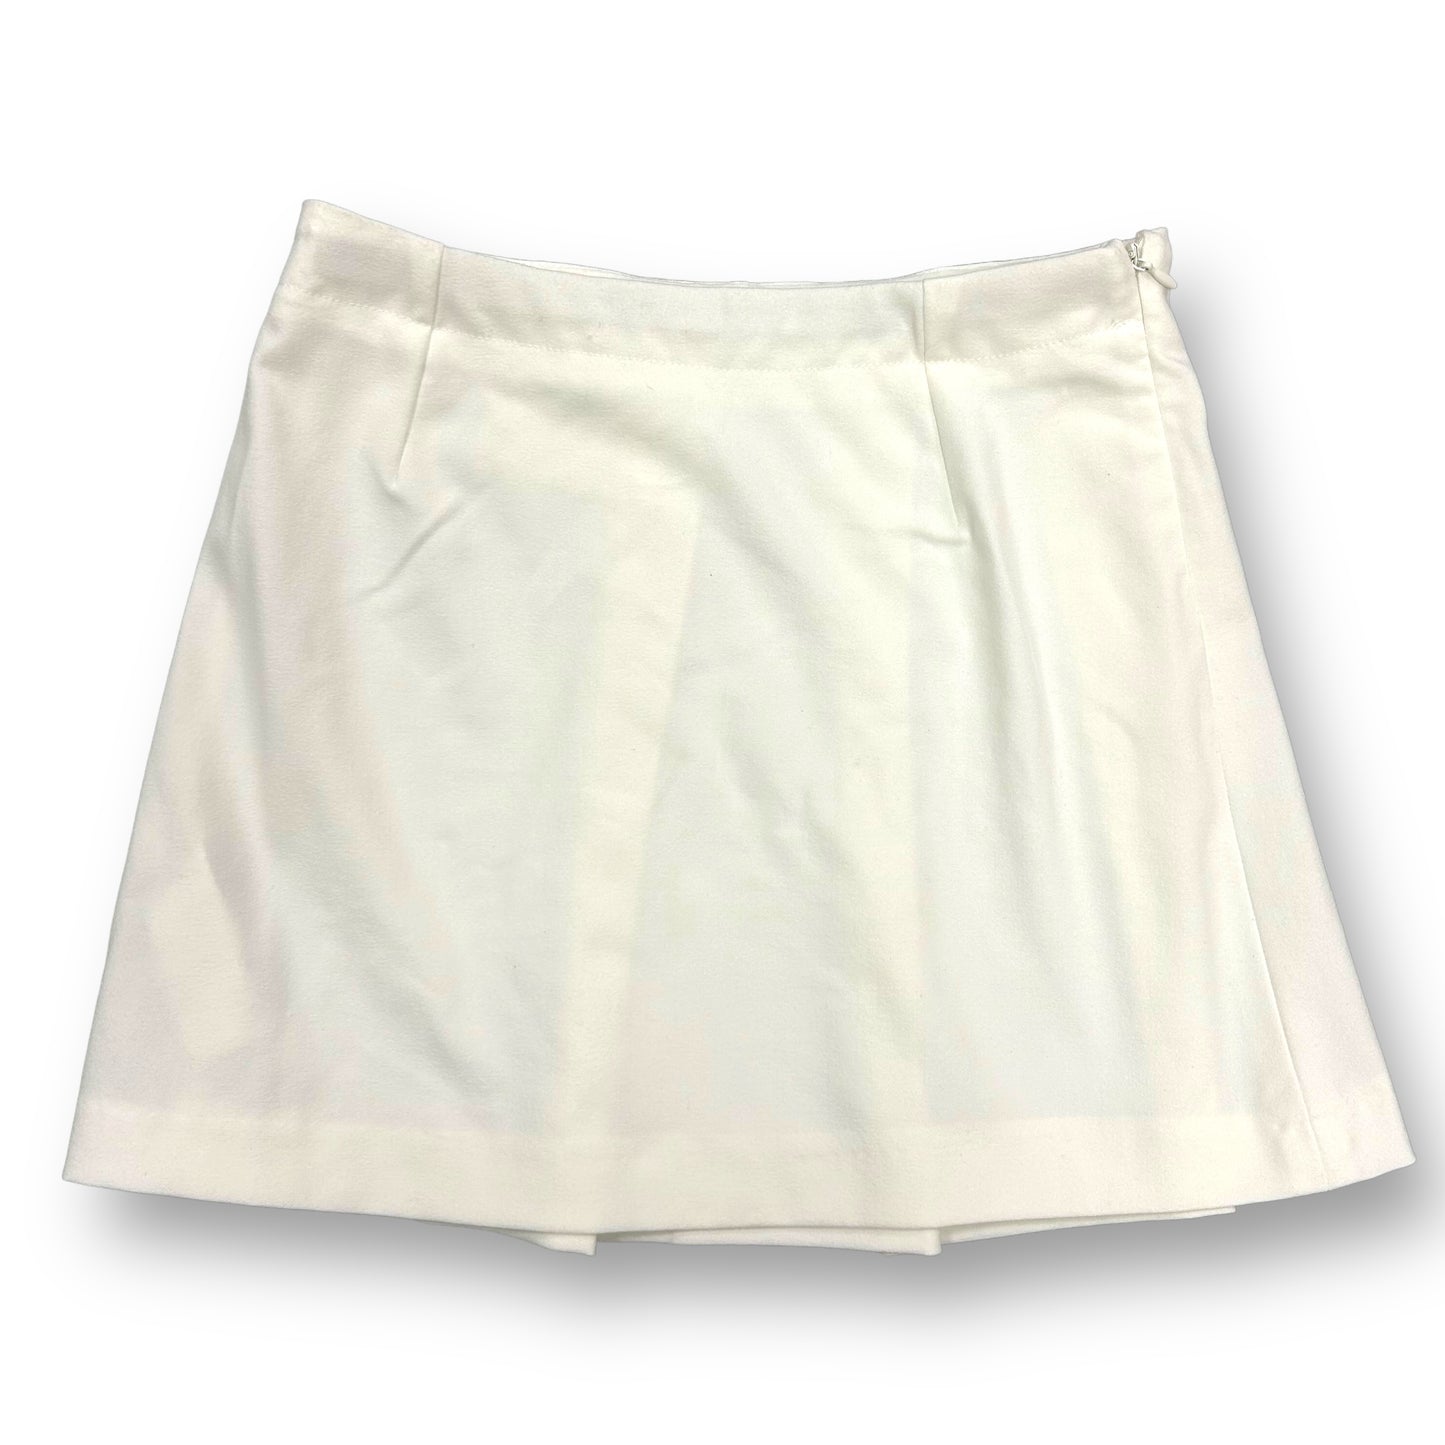 Girls Zara Age 10/11 Size 140 White Pleated Skirt with Side Buckle Accent